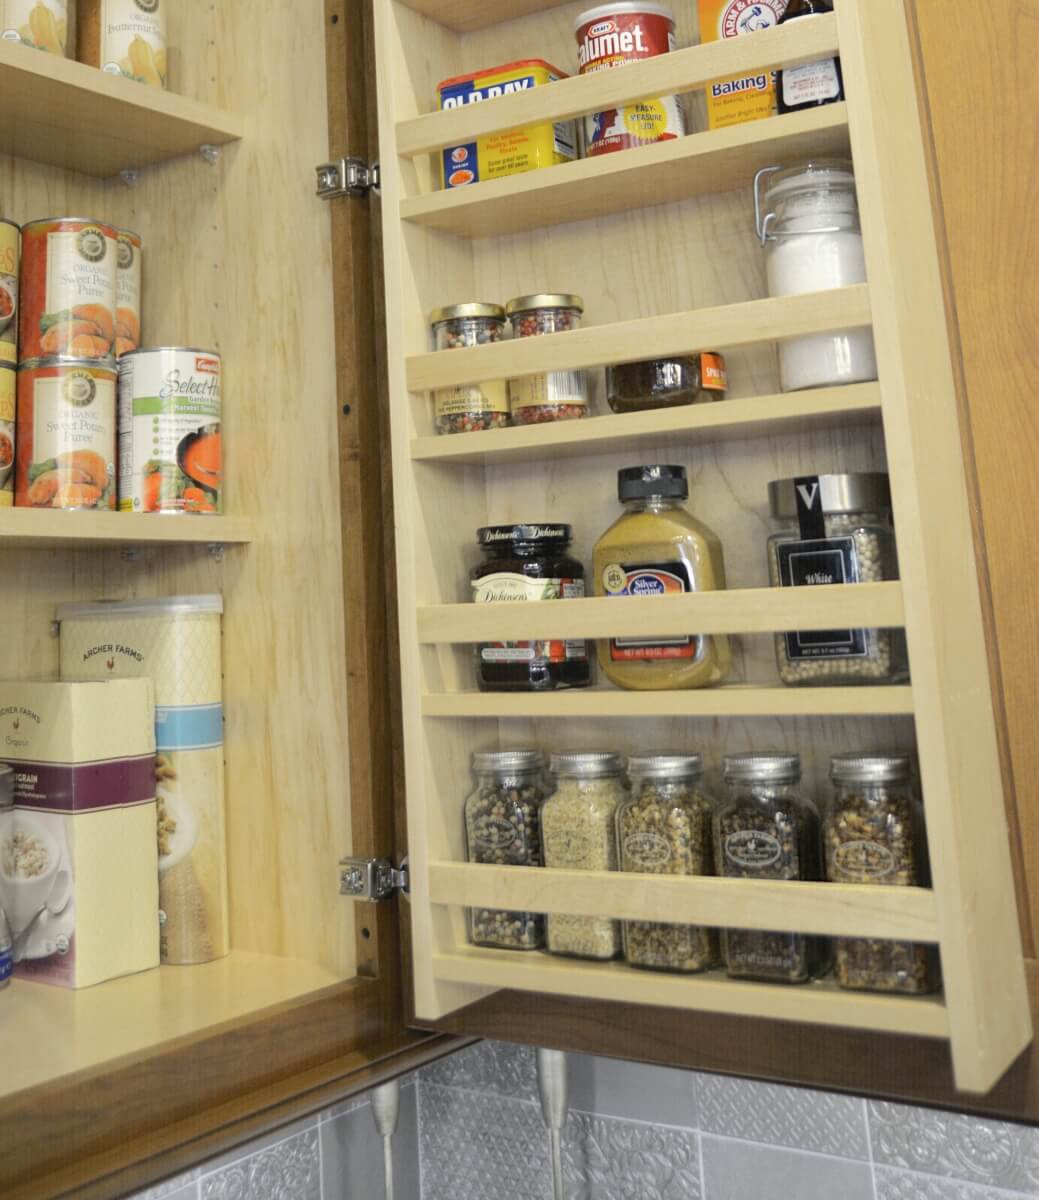 A traditional Cabinet Door Spice Rack from Dura Supreme offers convenient added storage in a wall cabinet in a traditional style kitchen from Dura Supreme Cabinetry.